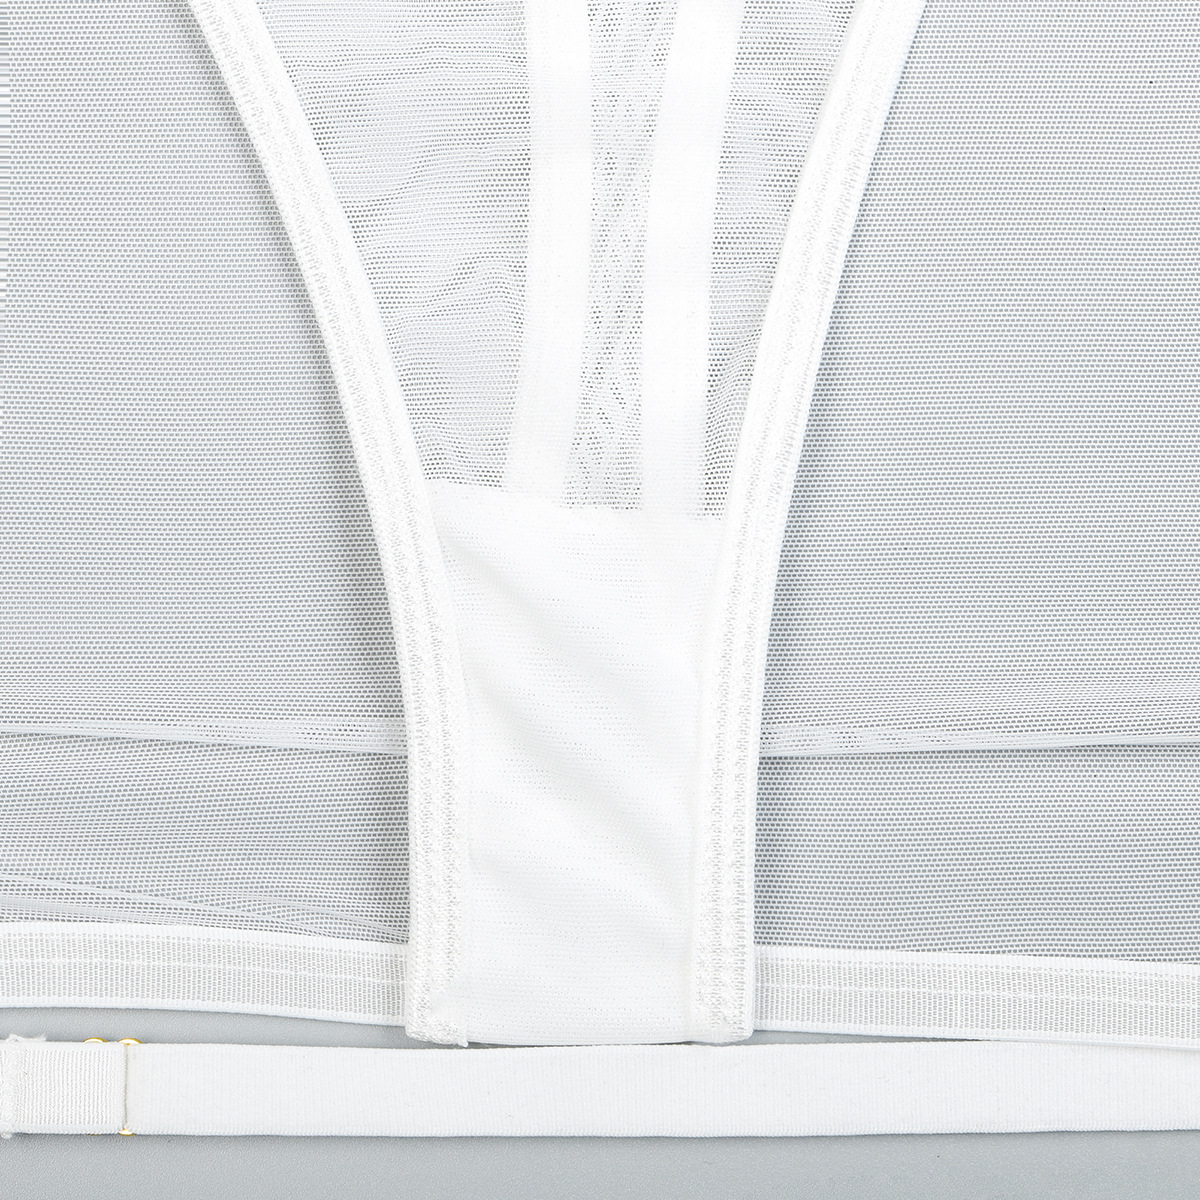 White Color Sheer Skirted Three Piece Lingerie Set